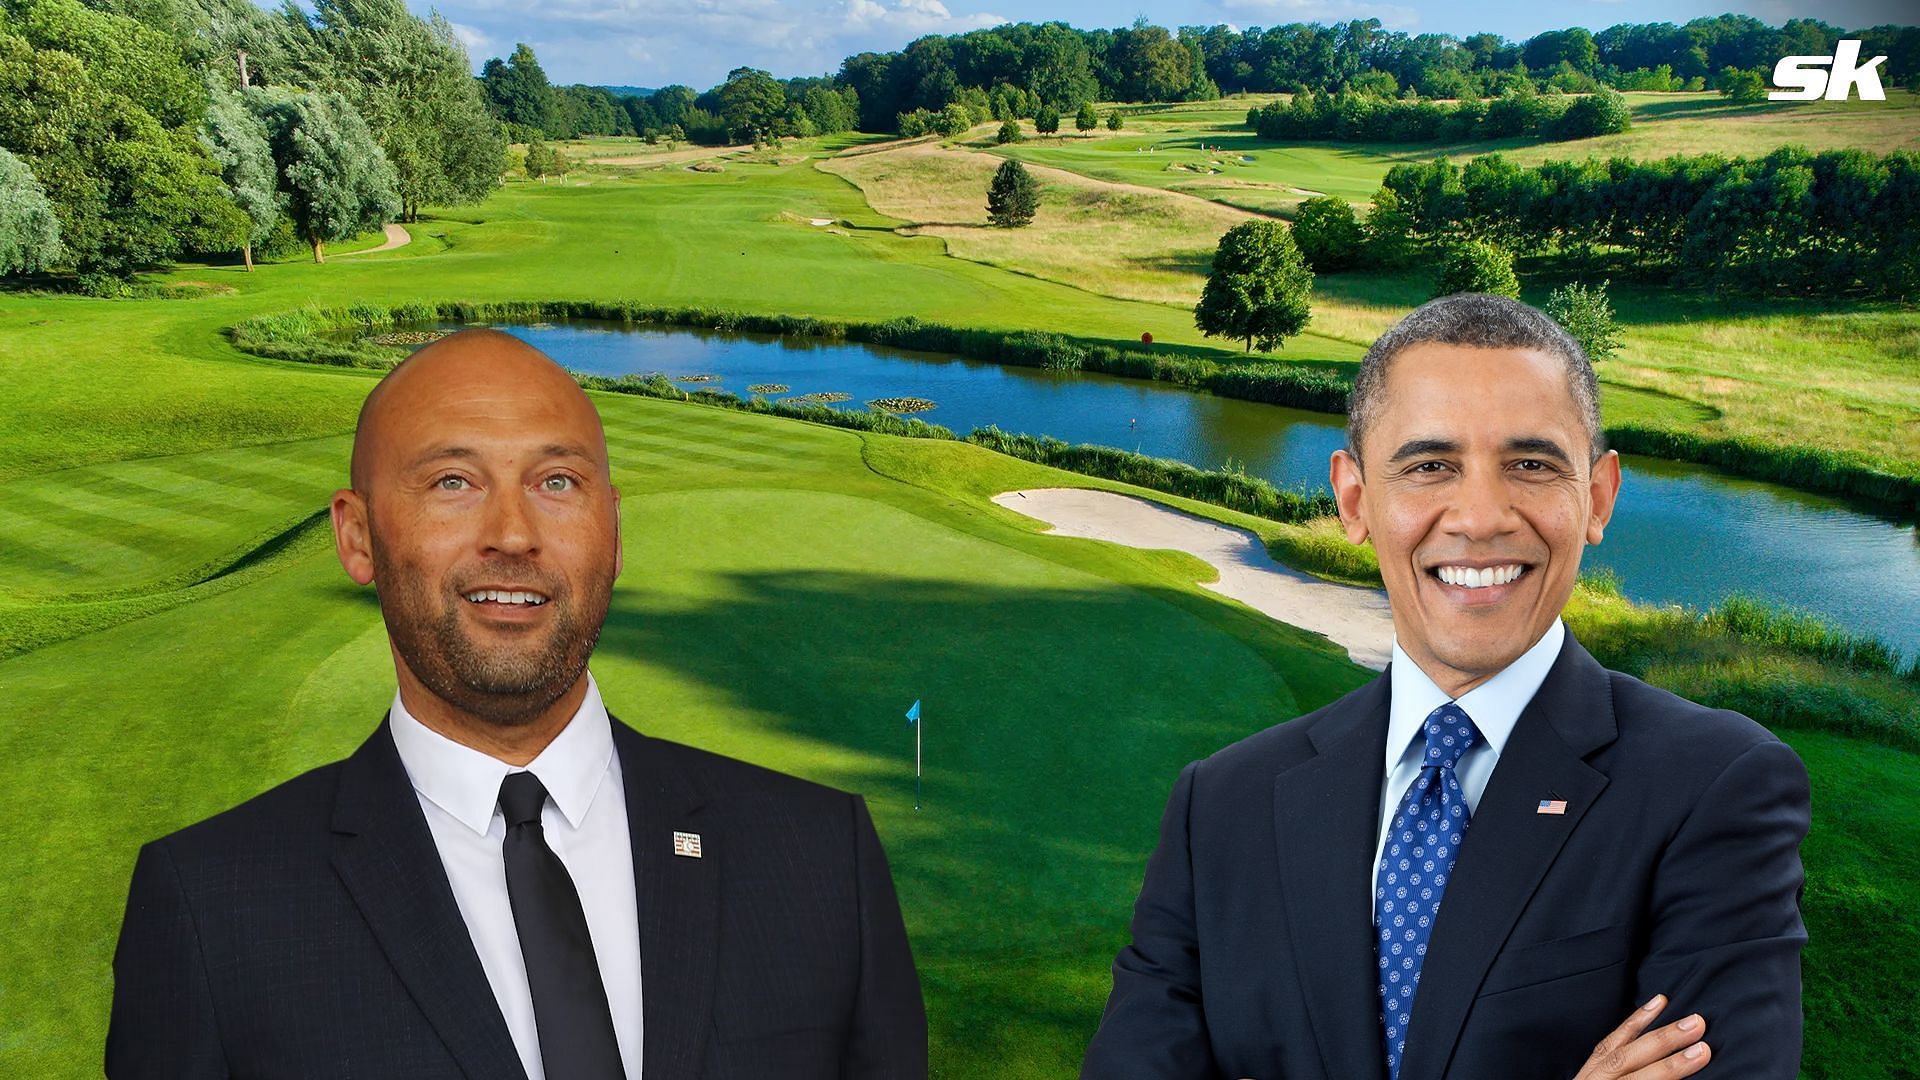 Derek Jeter pulled a fast one on Barack Obama during a 2014 round of golf